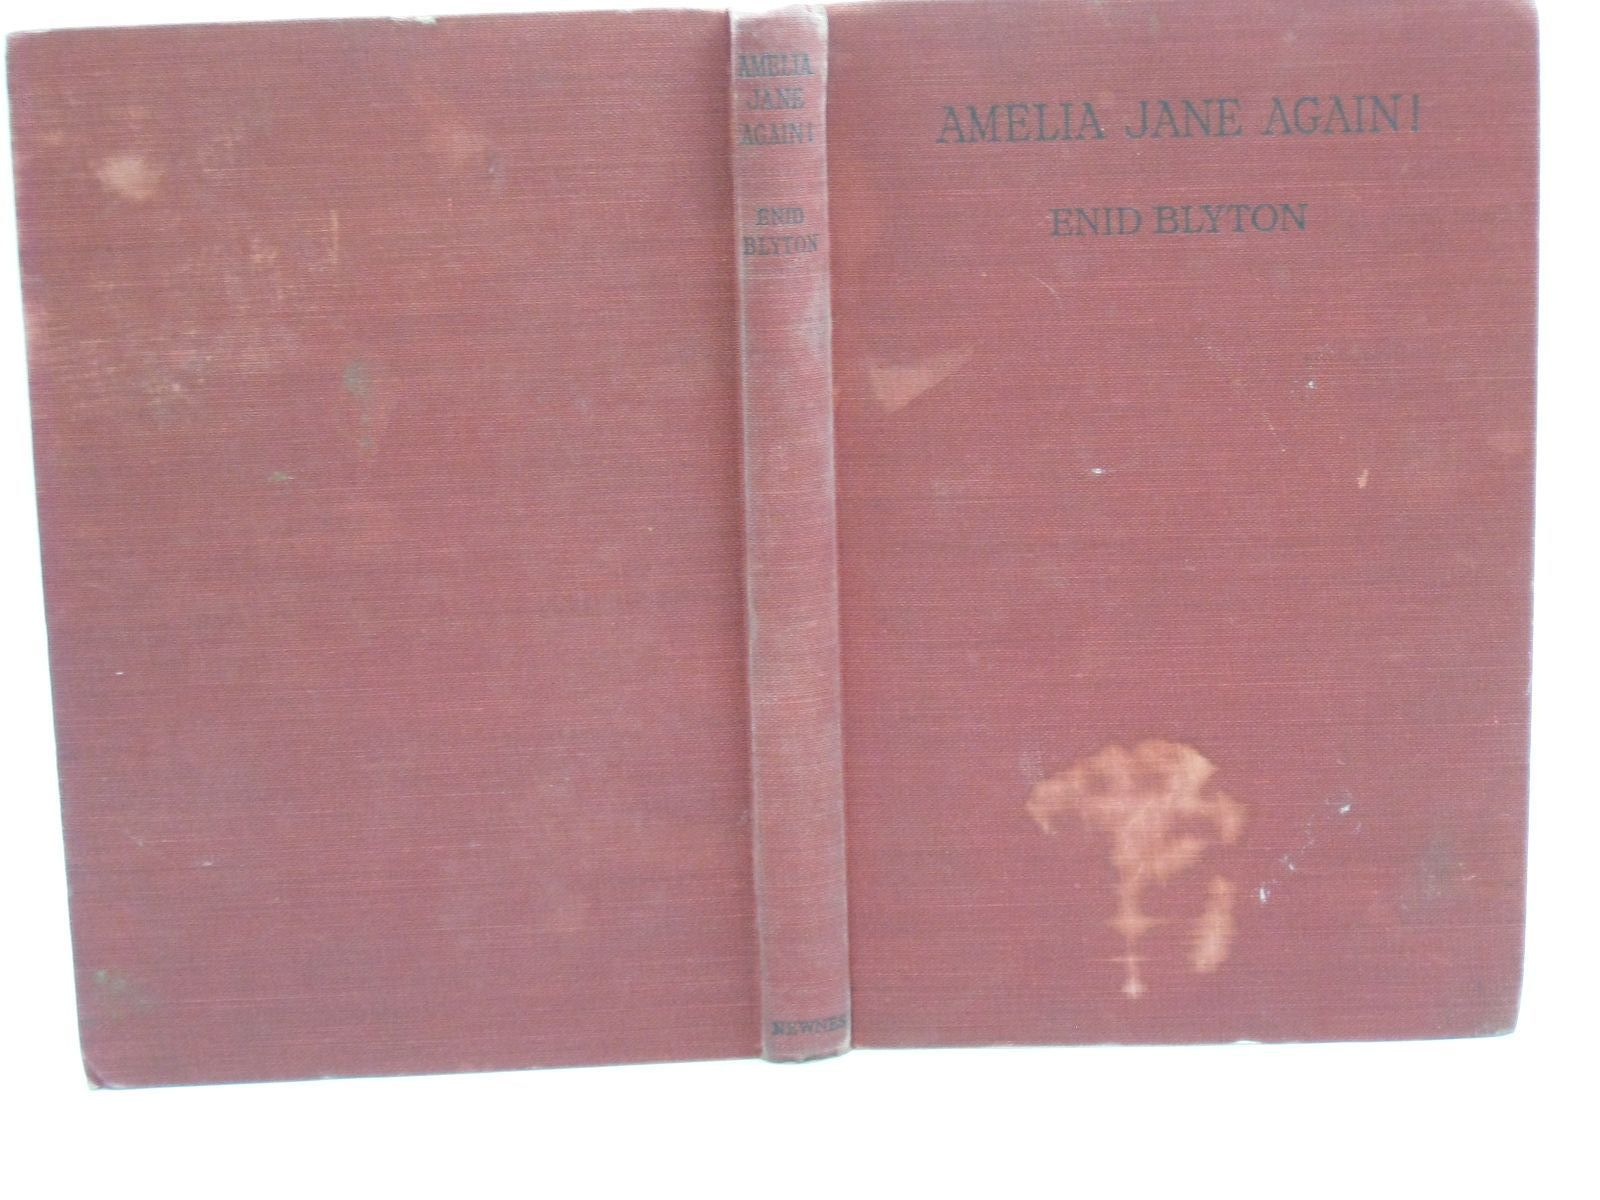 Photo of AMELIA JANE AGAIN written by Blyton, Enid illustrated by Venus, Sylvia published by George Newnes Ltd. (STOCK CODE: 1405858)  for sale by Stella & Rose's Books